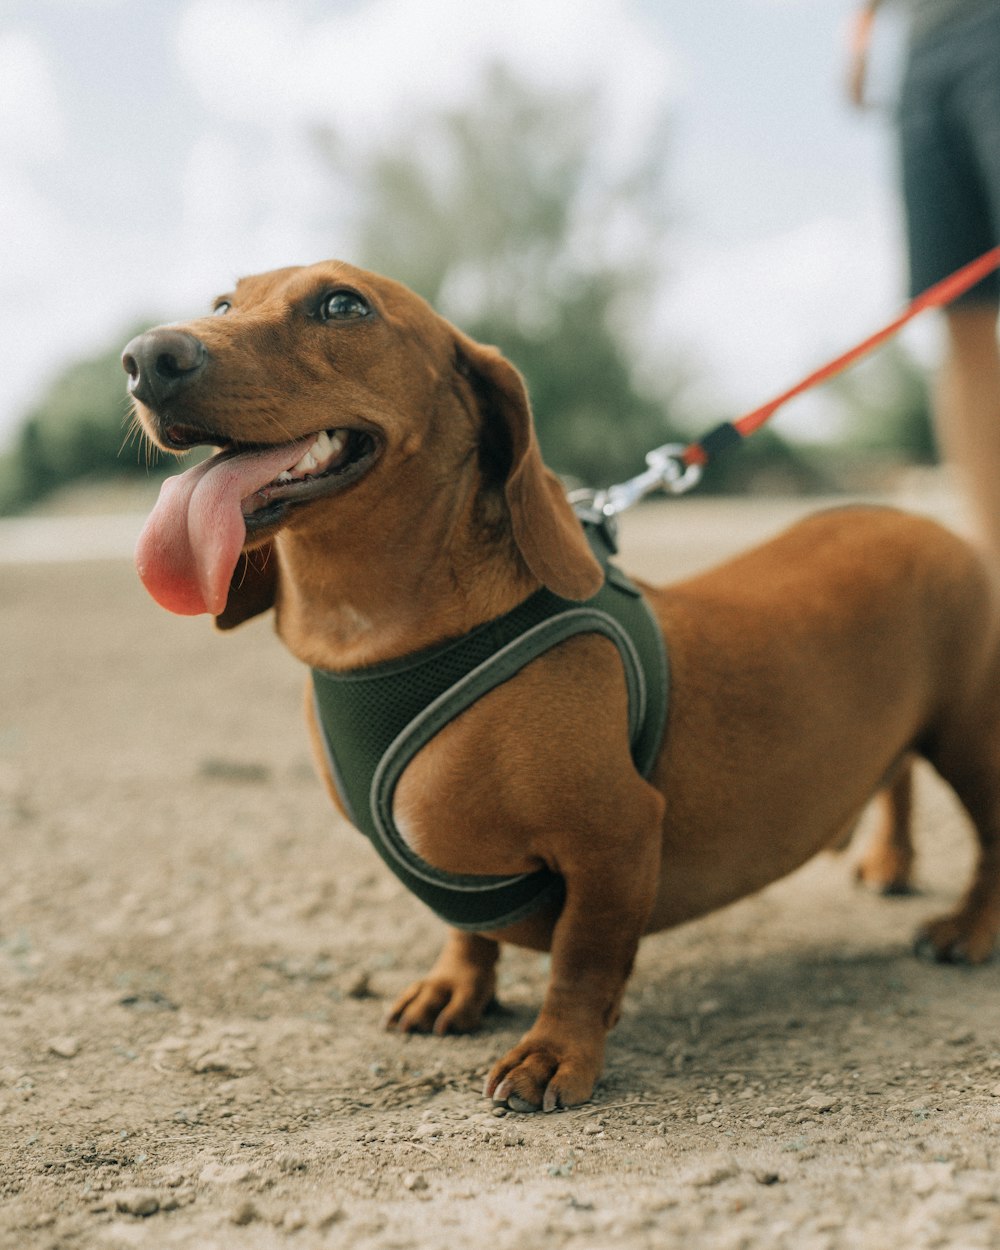 a brown dog wearing a green harness on a leash